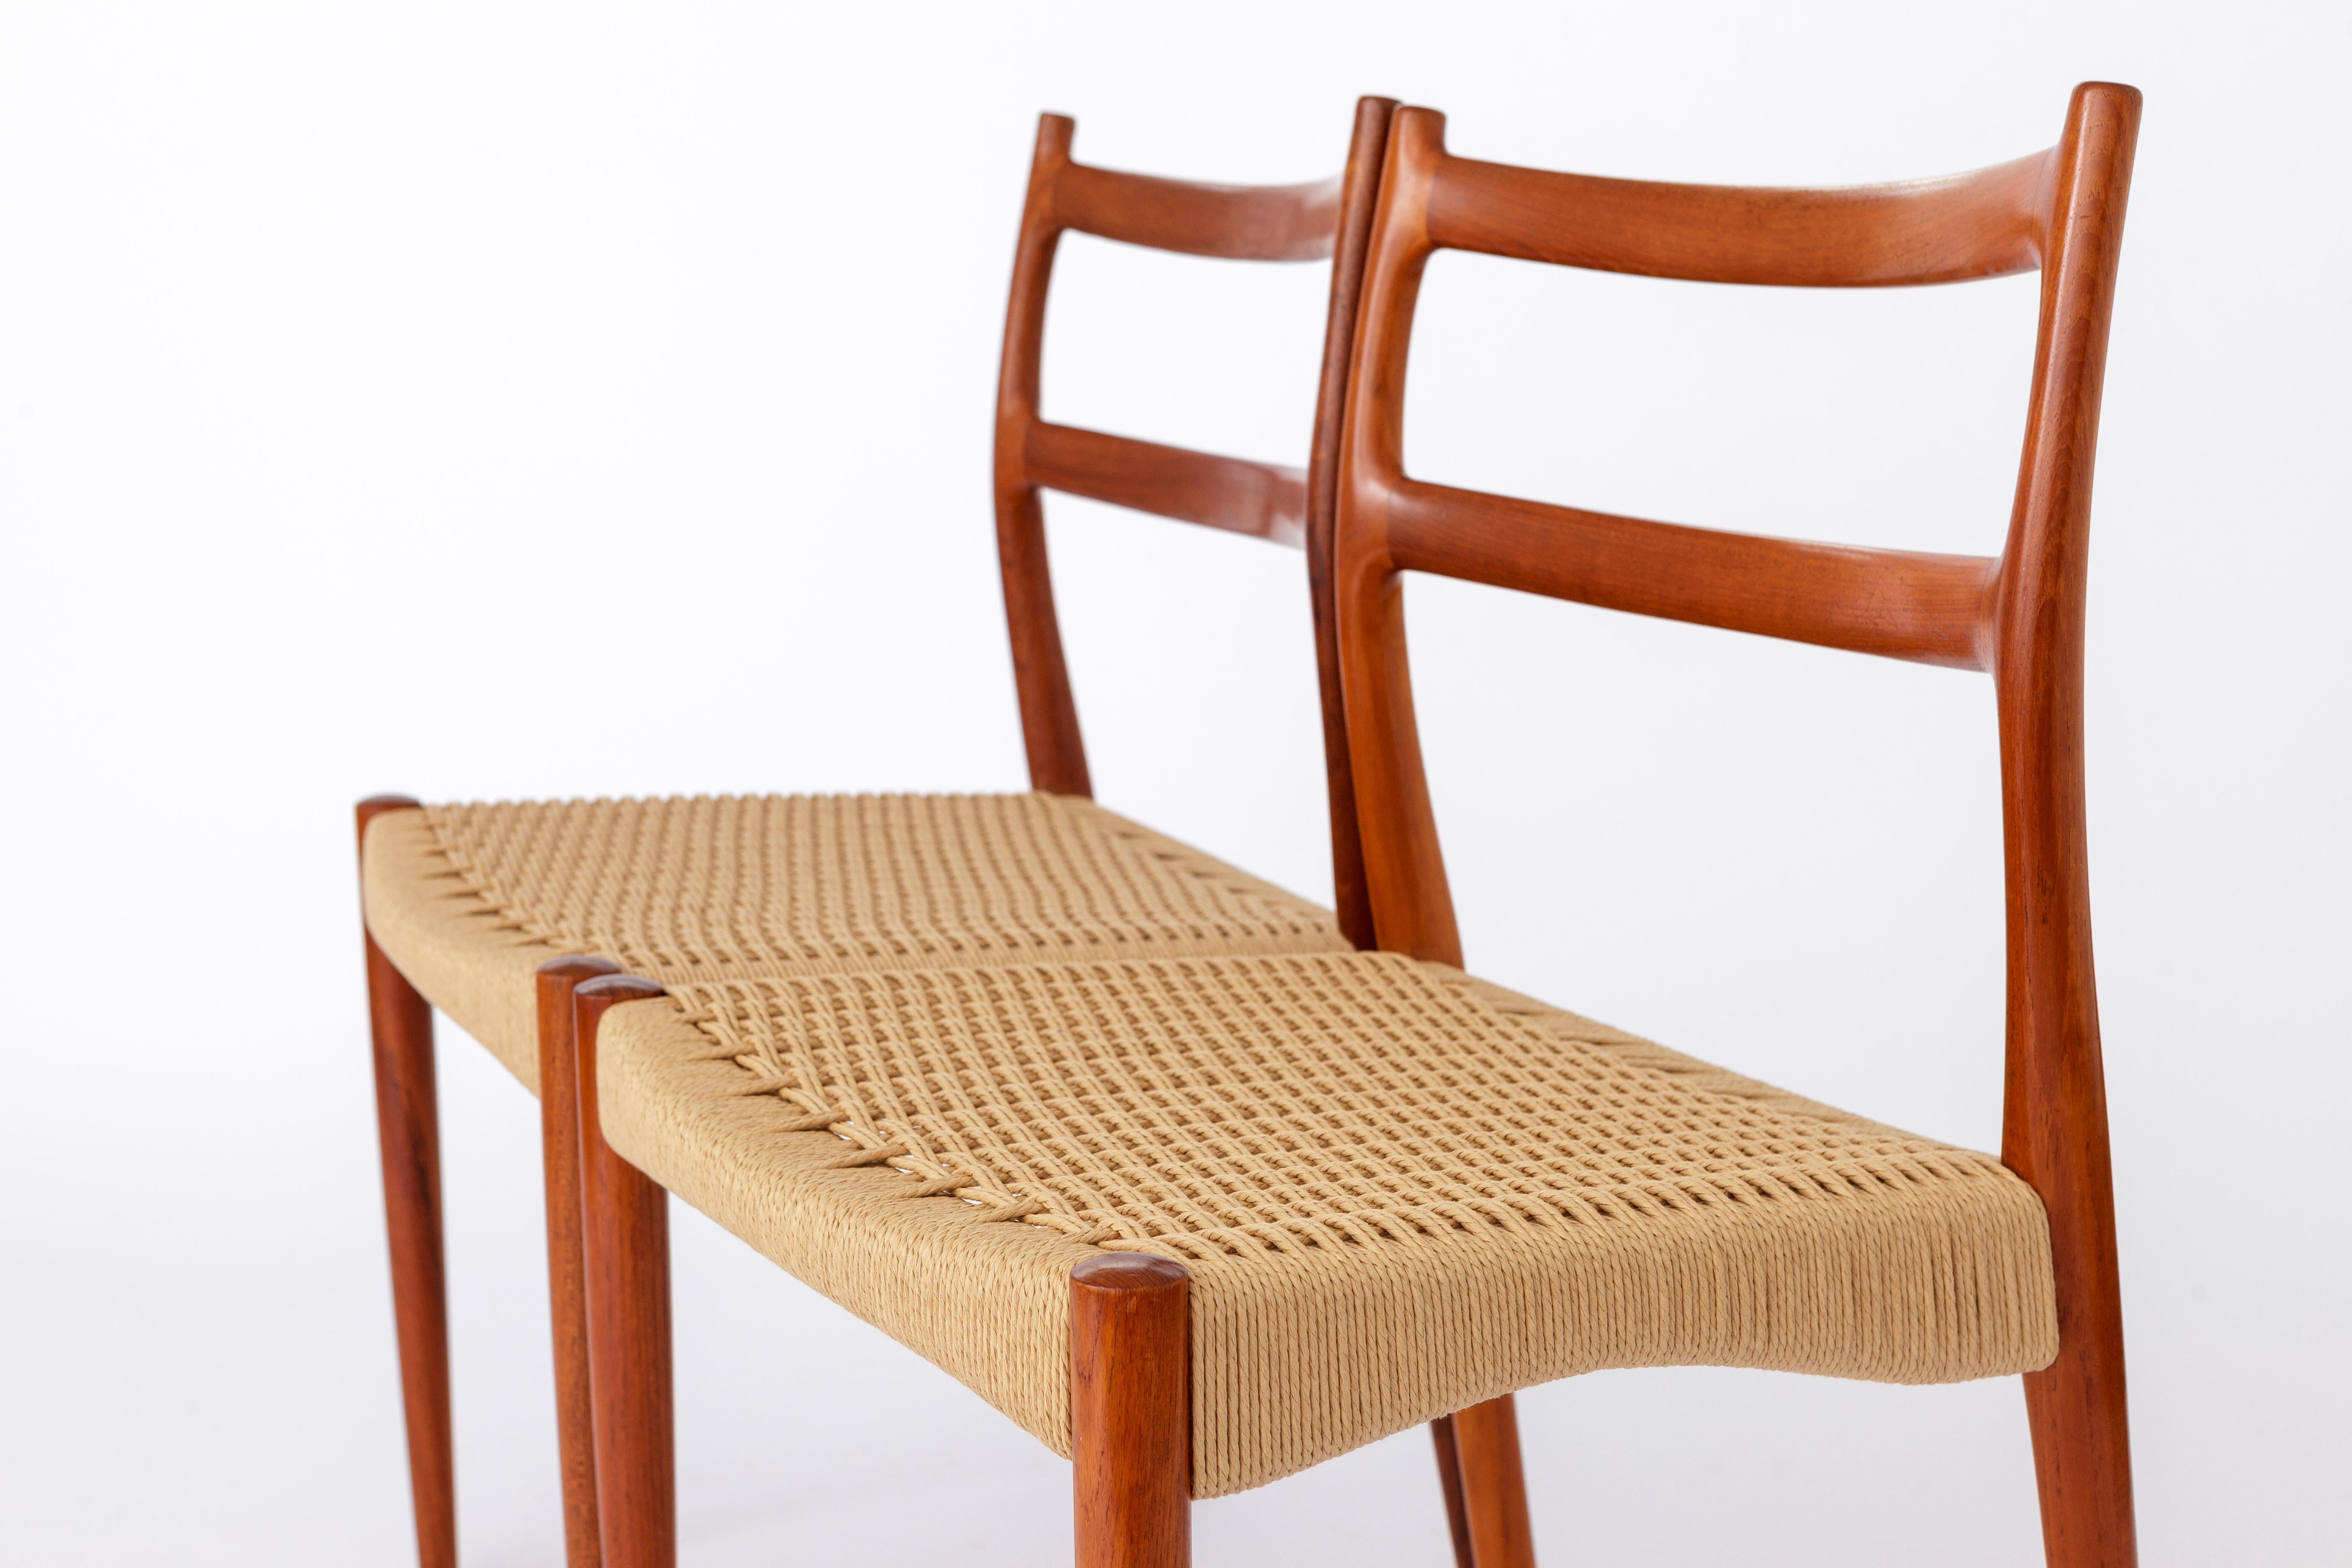 2 Søren Ladefoged chairs, teak, 1960s, papercord seat, dining chairs, set of 2 In Fair Condition For Sale In Hannover, DE